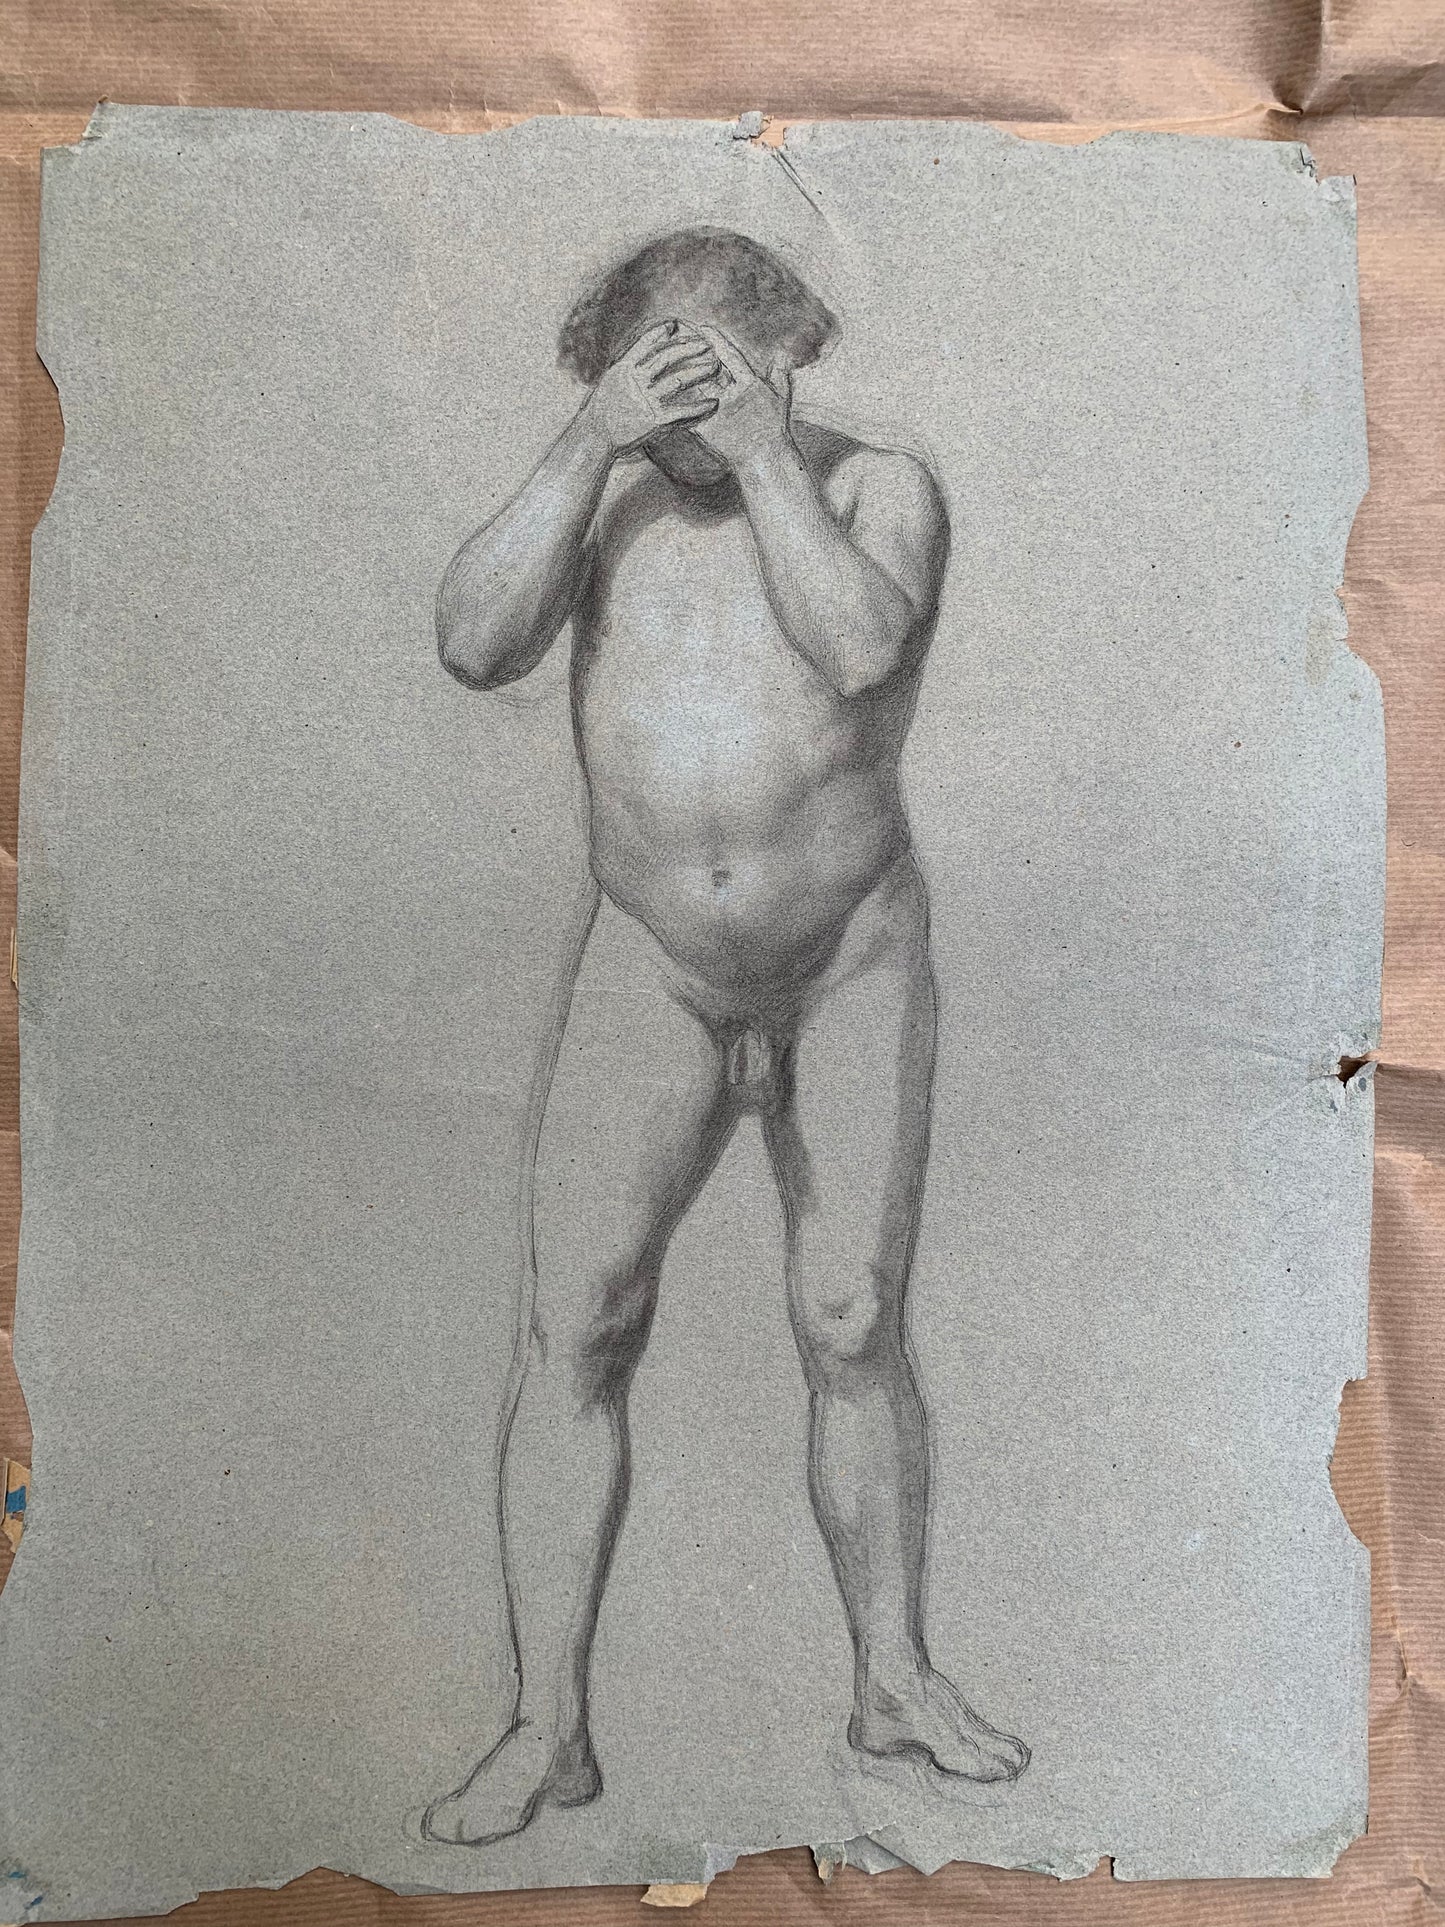 Preparatory anatomical study for the figure of a man with hands on his face.